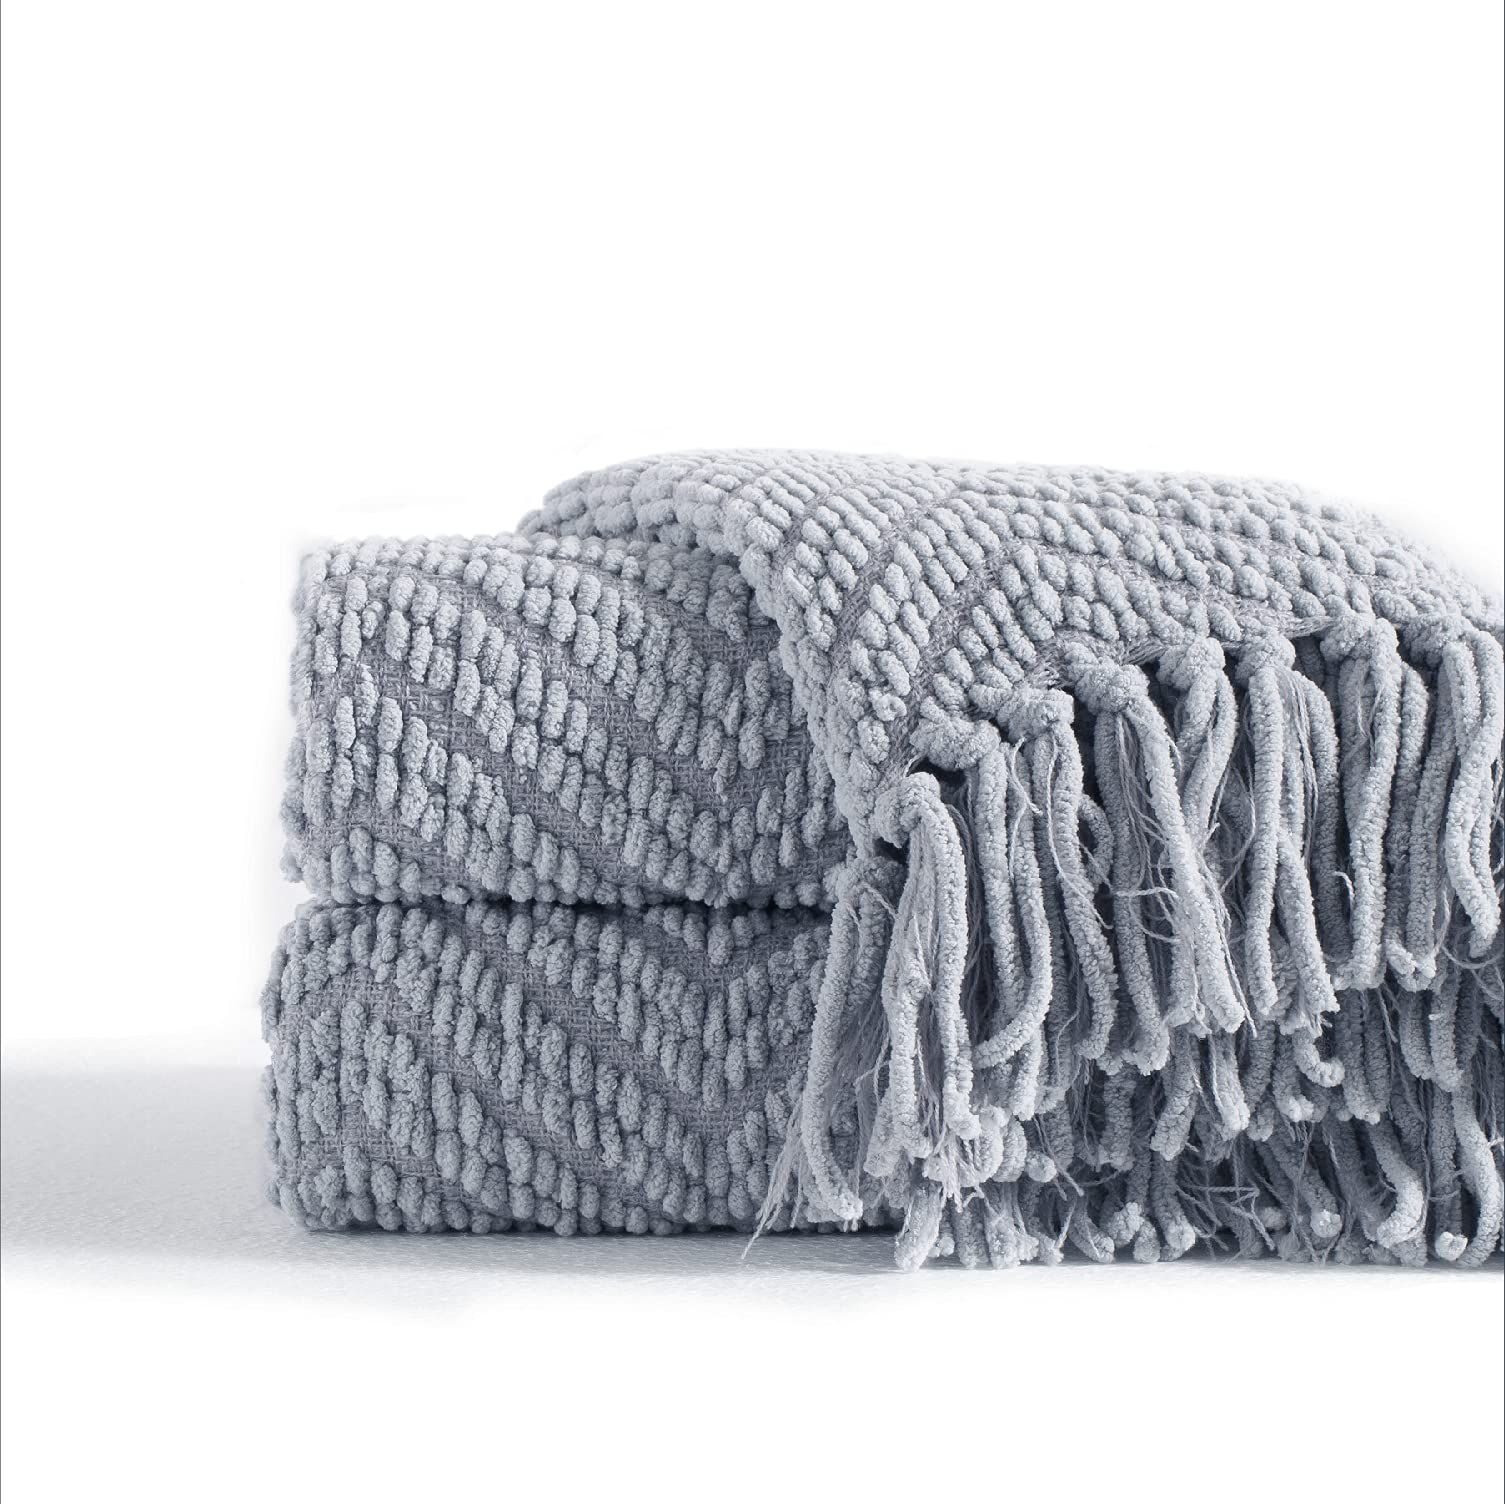 Bedsure Grey Throw Blanket for Couch, Knit Woven Chenille Blanket Versatile for Twin Bed , 60 x 80 I | Amazon (US)